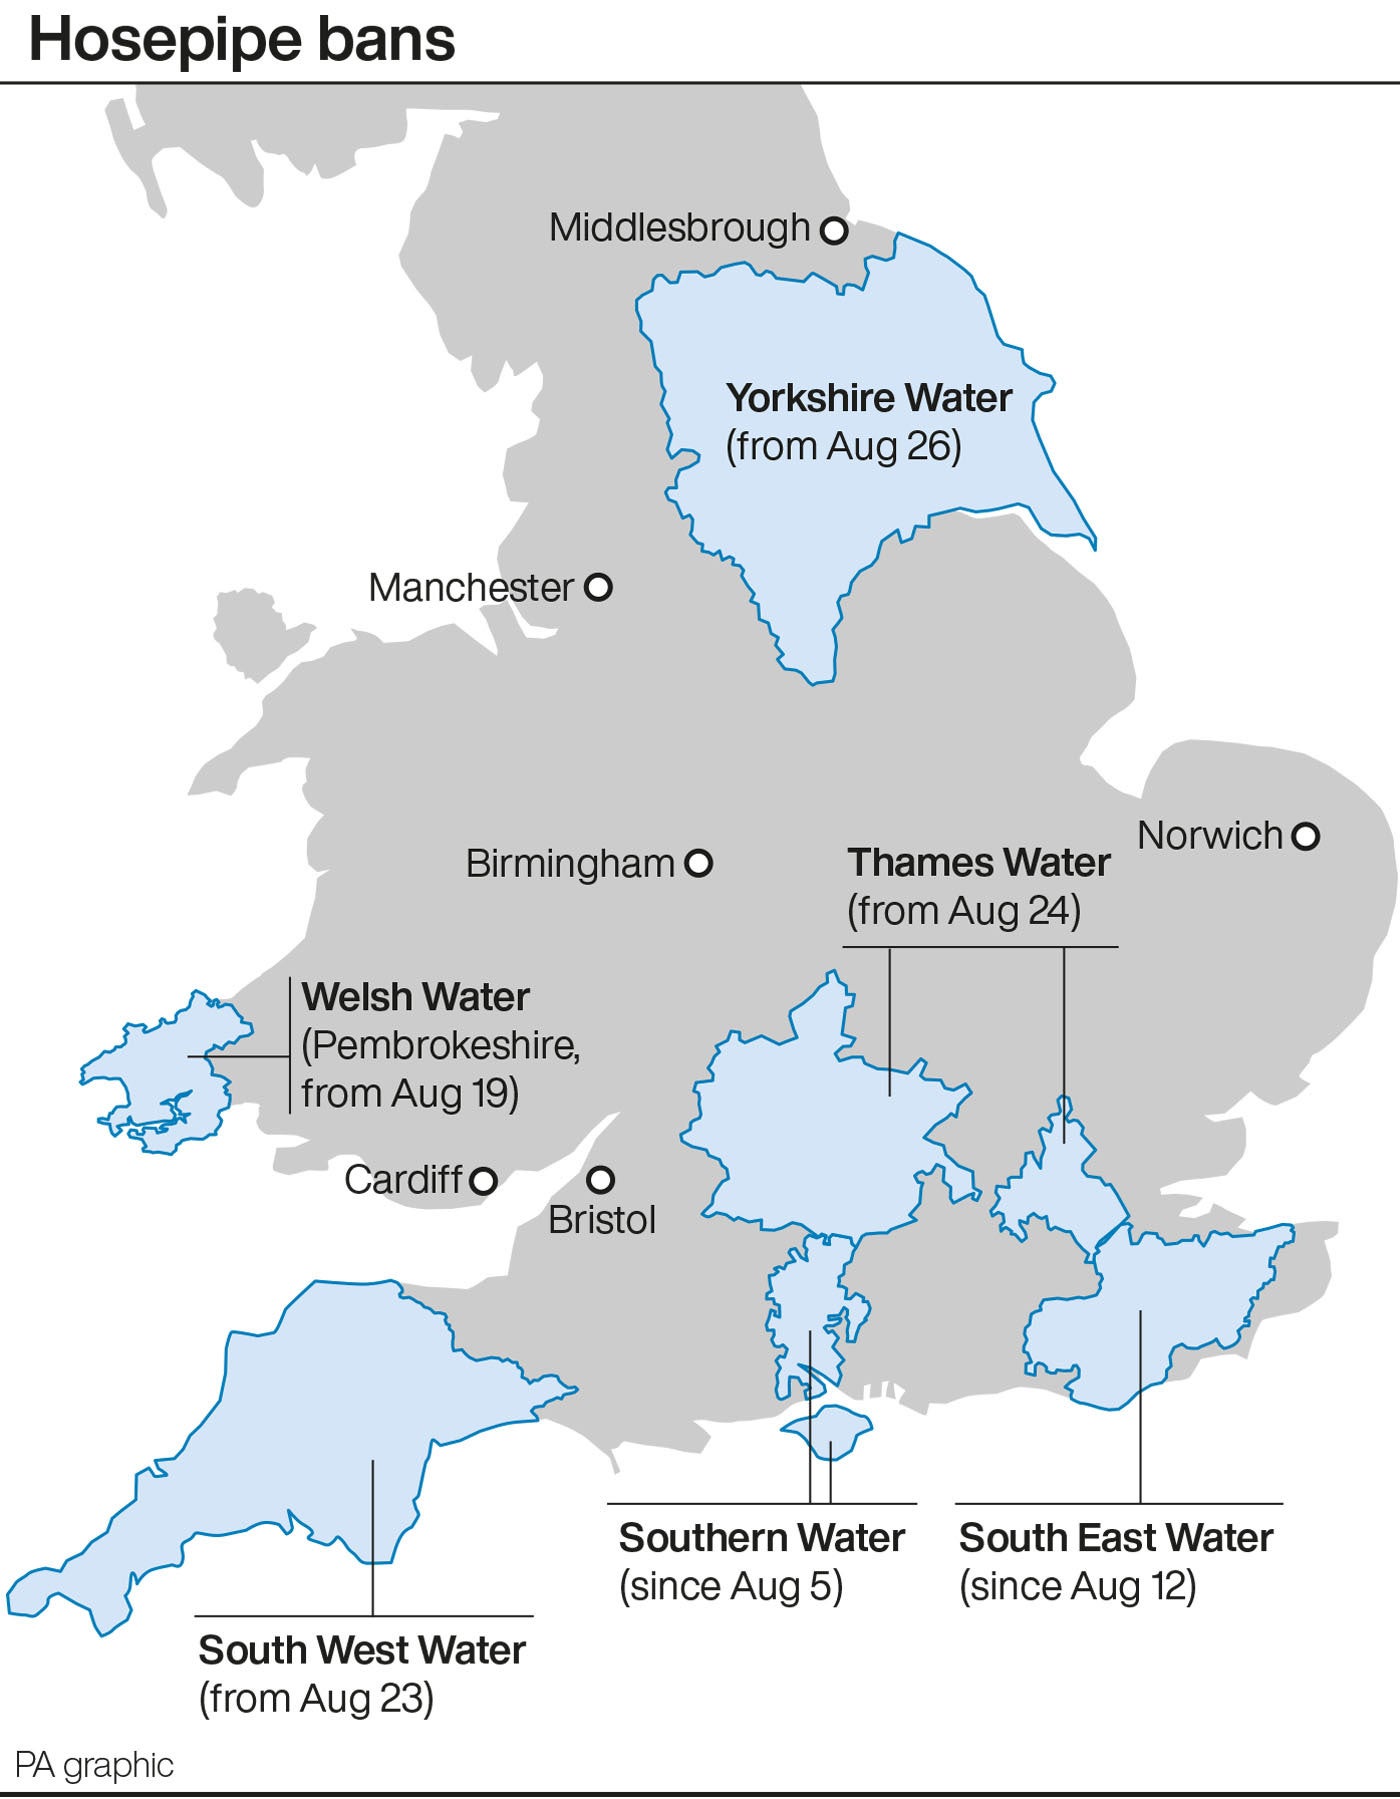 Map shows location of hosepipe bans in England and Wales